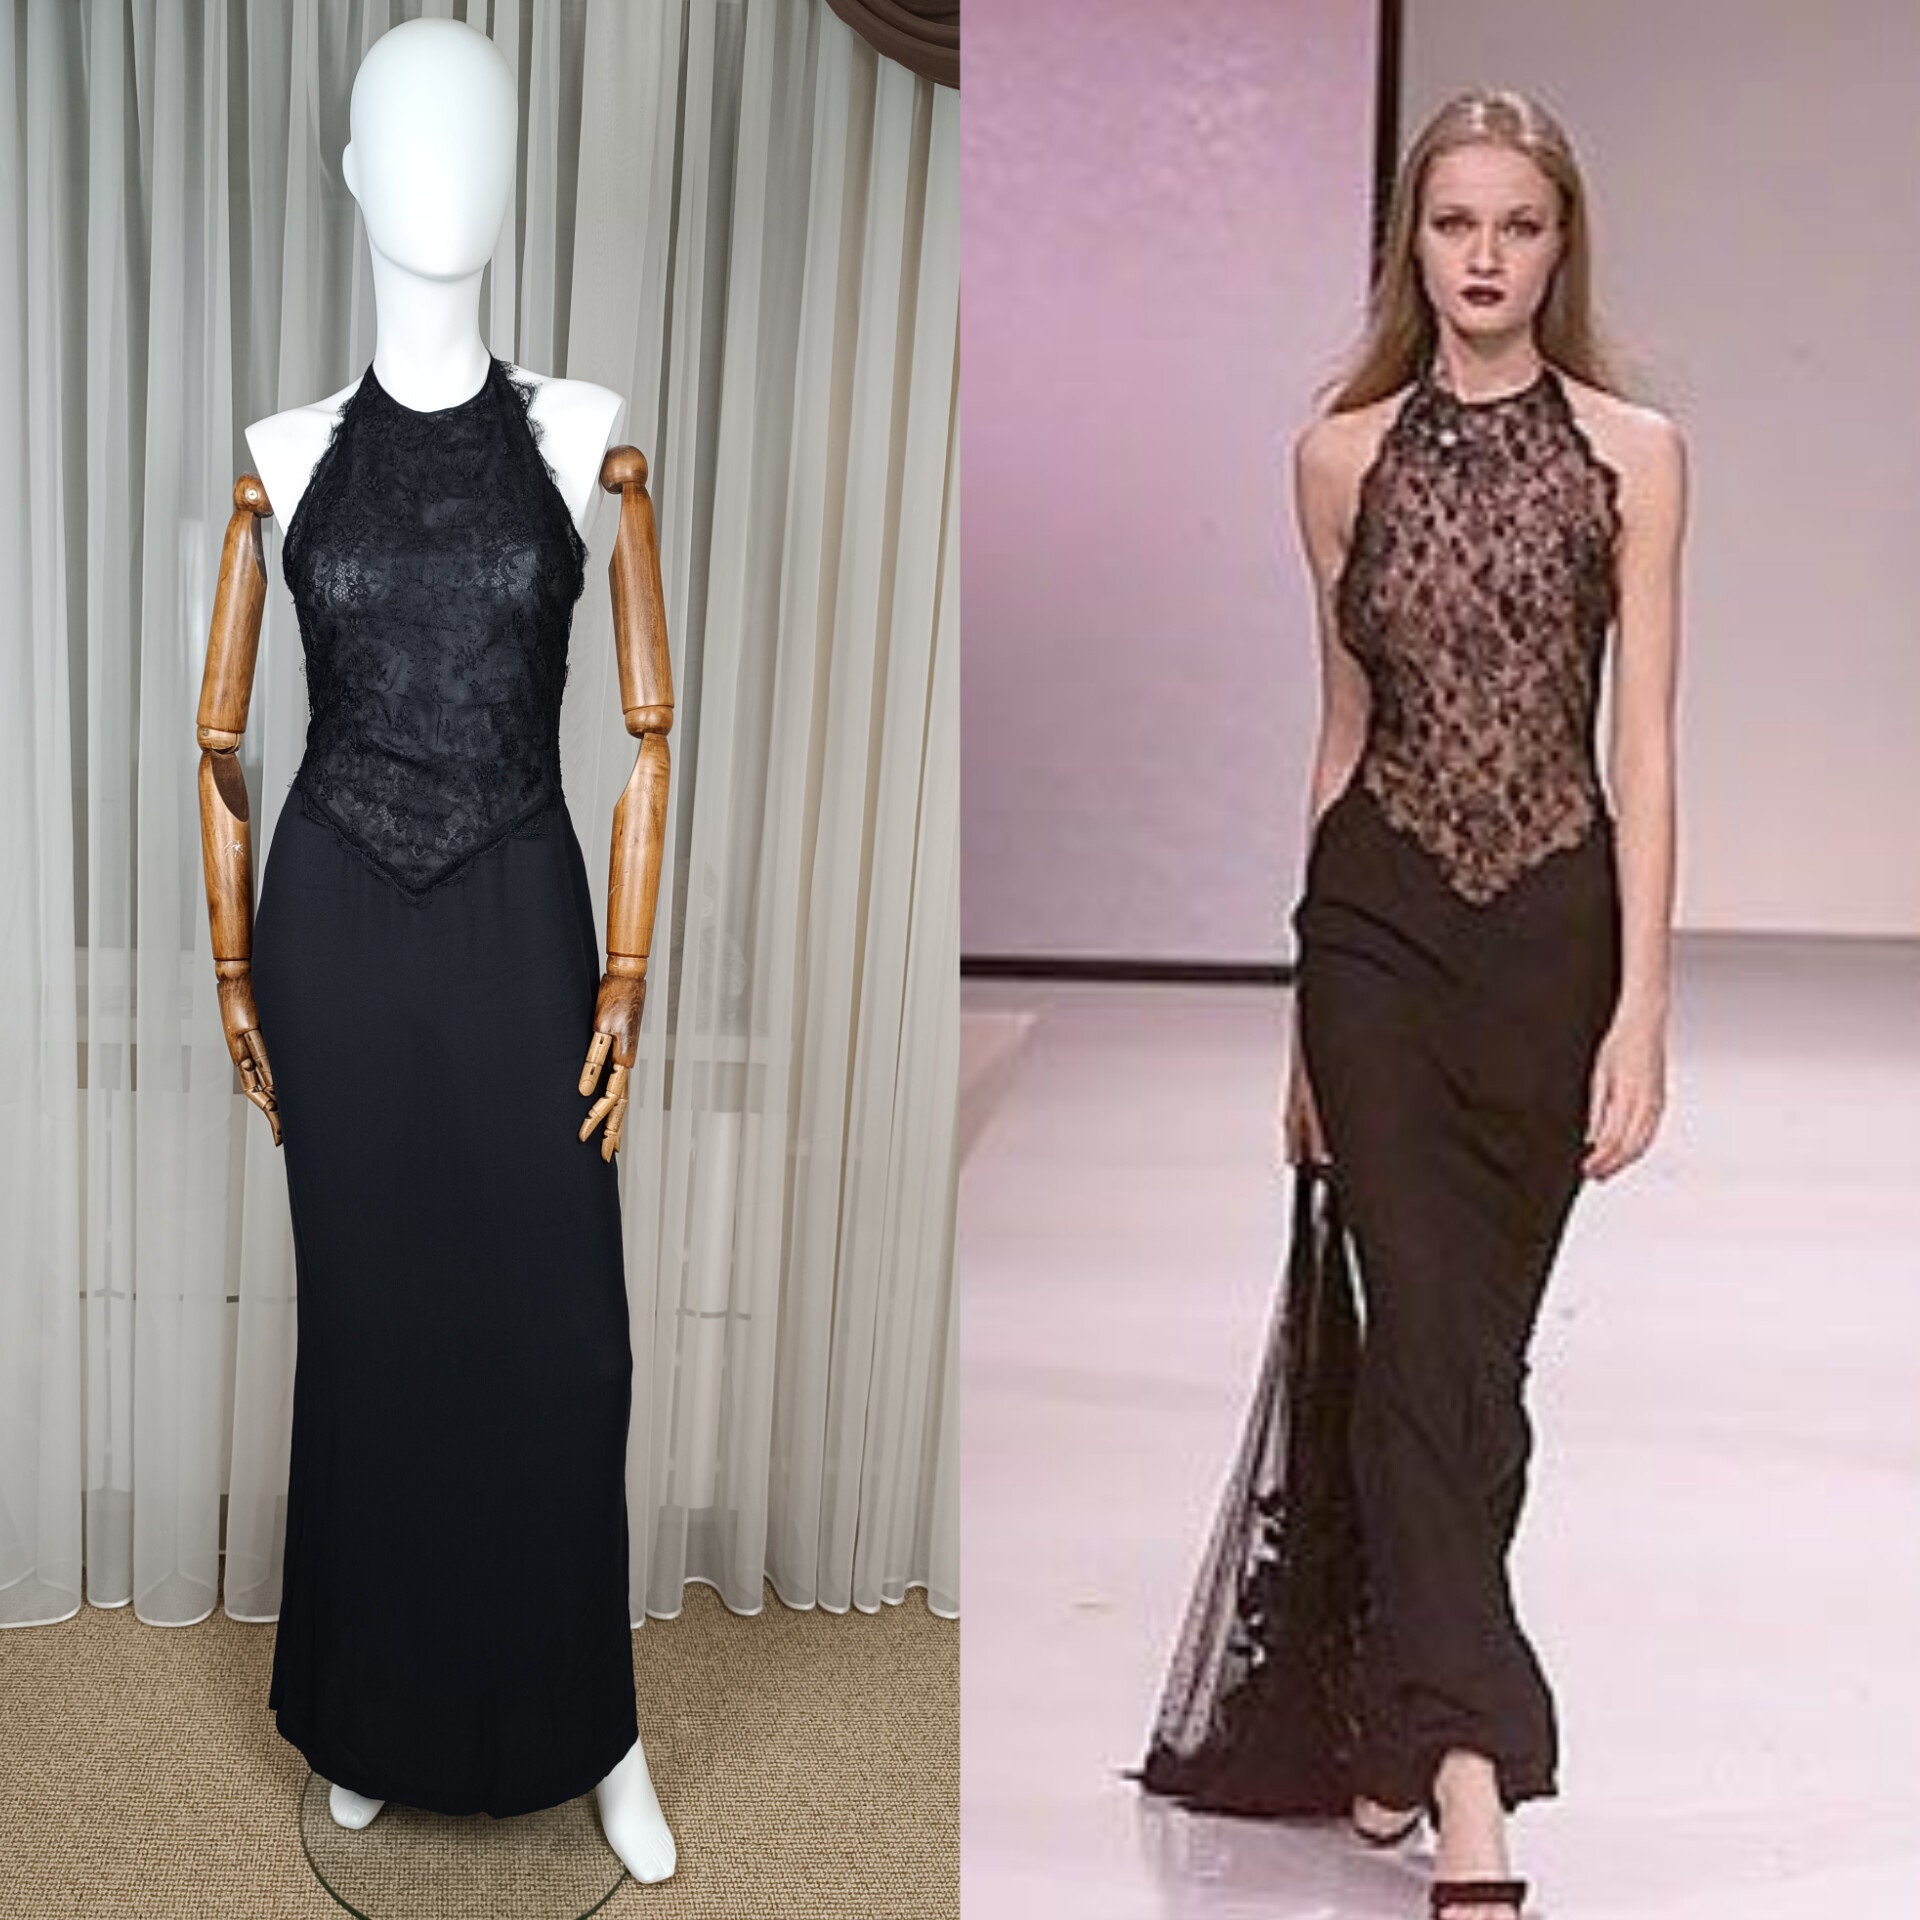 Gianni Versace F/W 2000 Runway Plunging Lace Silk Backless Evening Dress  Gown